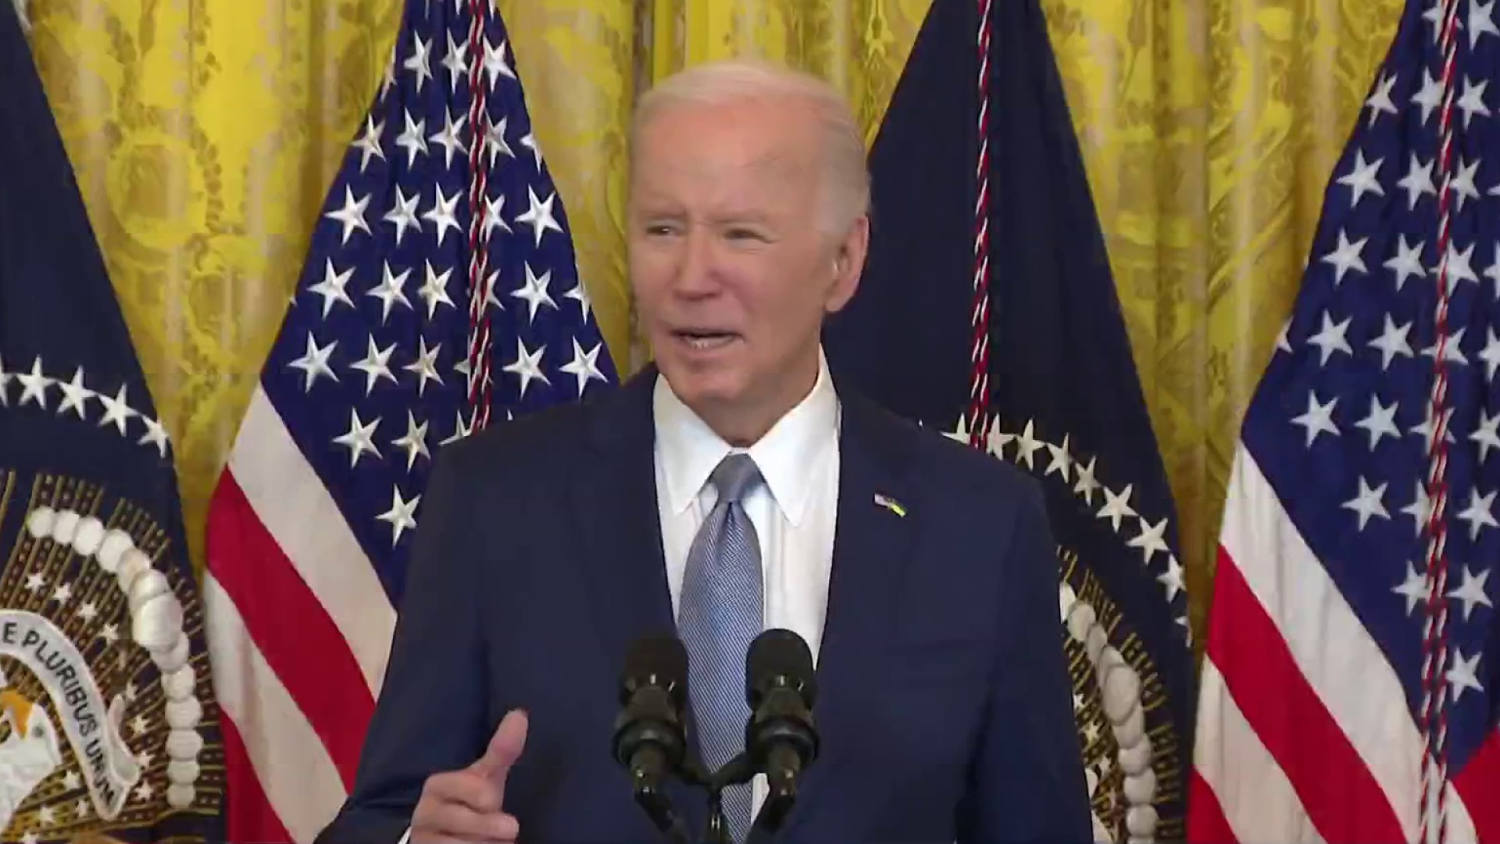 Biden says he’s ‘in this race to the end’ amid growing calls to drop out